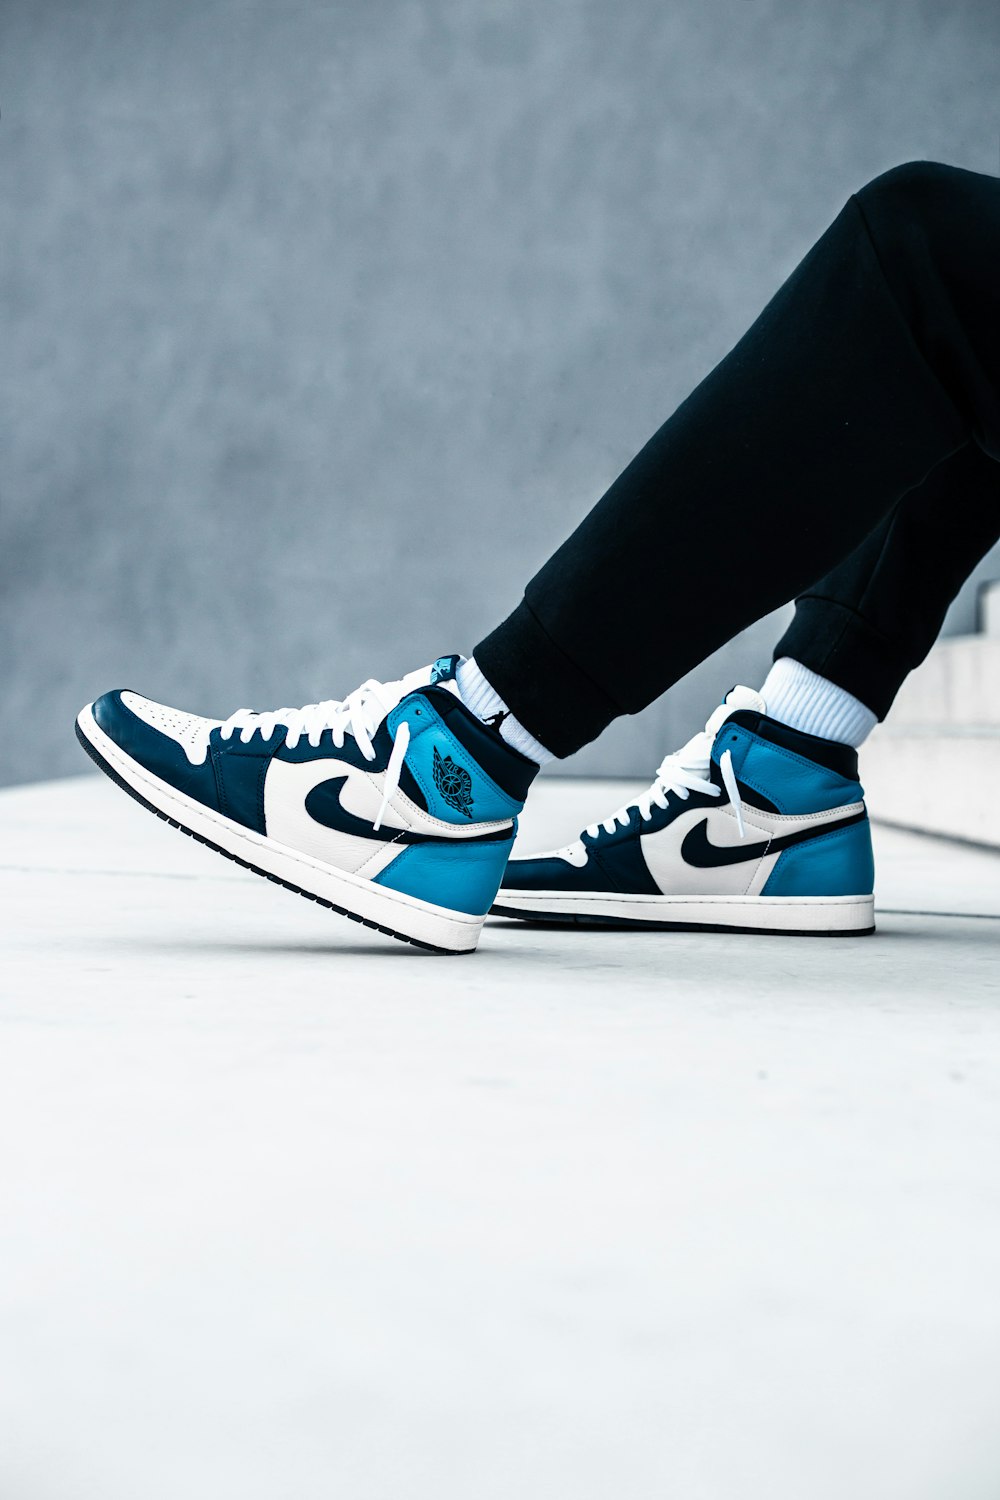 Miguel Ángel político Coche Person wearing black pants and blue and white nike sneakers photo – Free  Slovensko Image on Unsplash